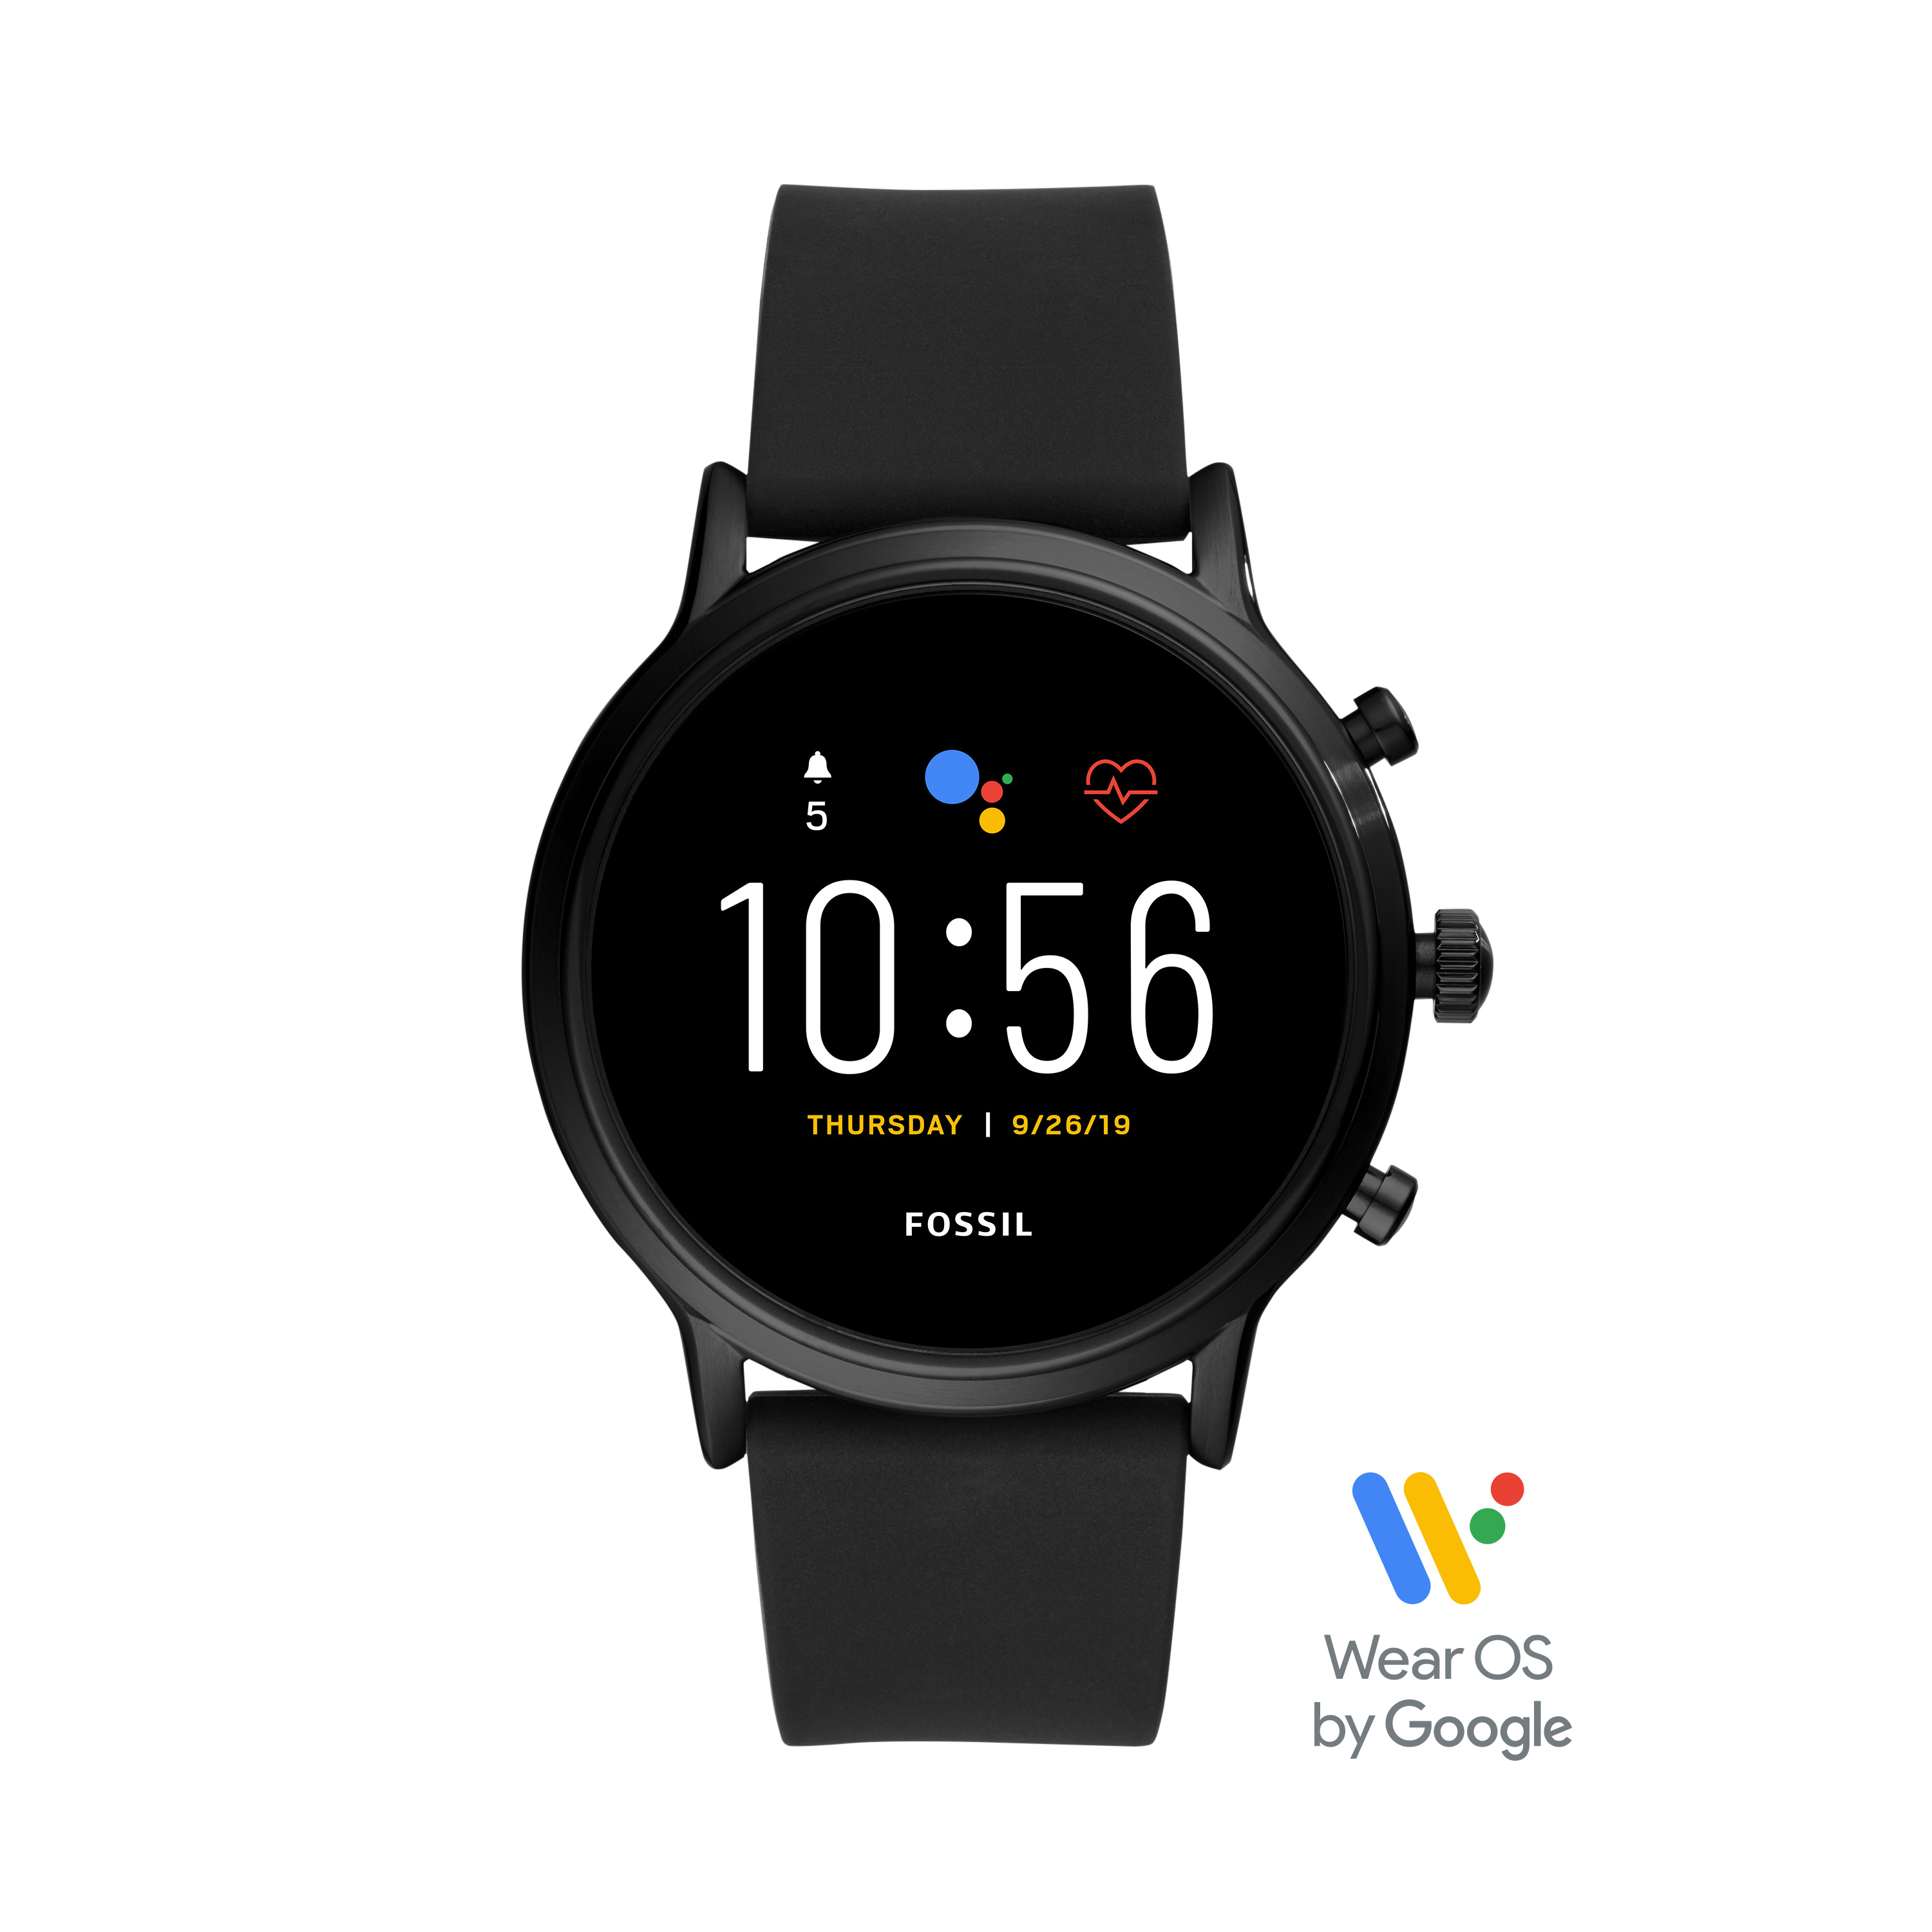 Gen 5 Fossil Touchscreen Smartwatch – now allows Android and iPhone users to answer tethered calls - Alvinology